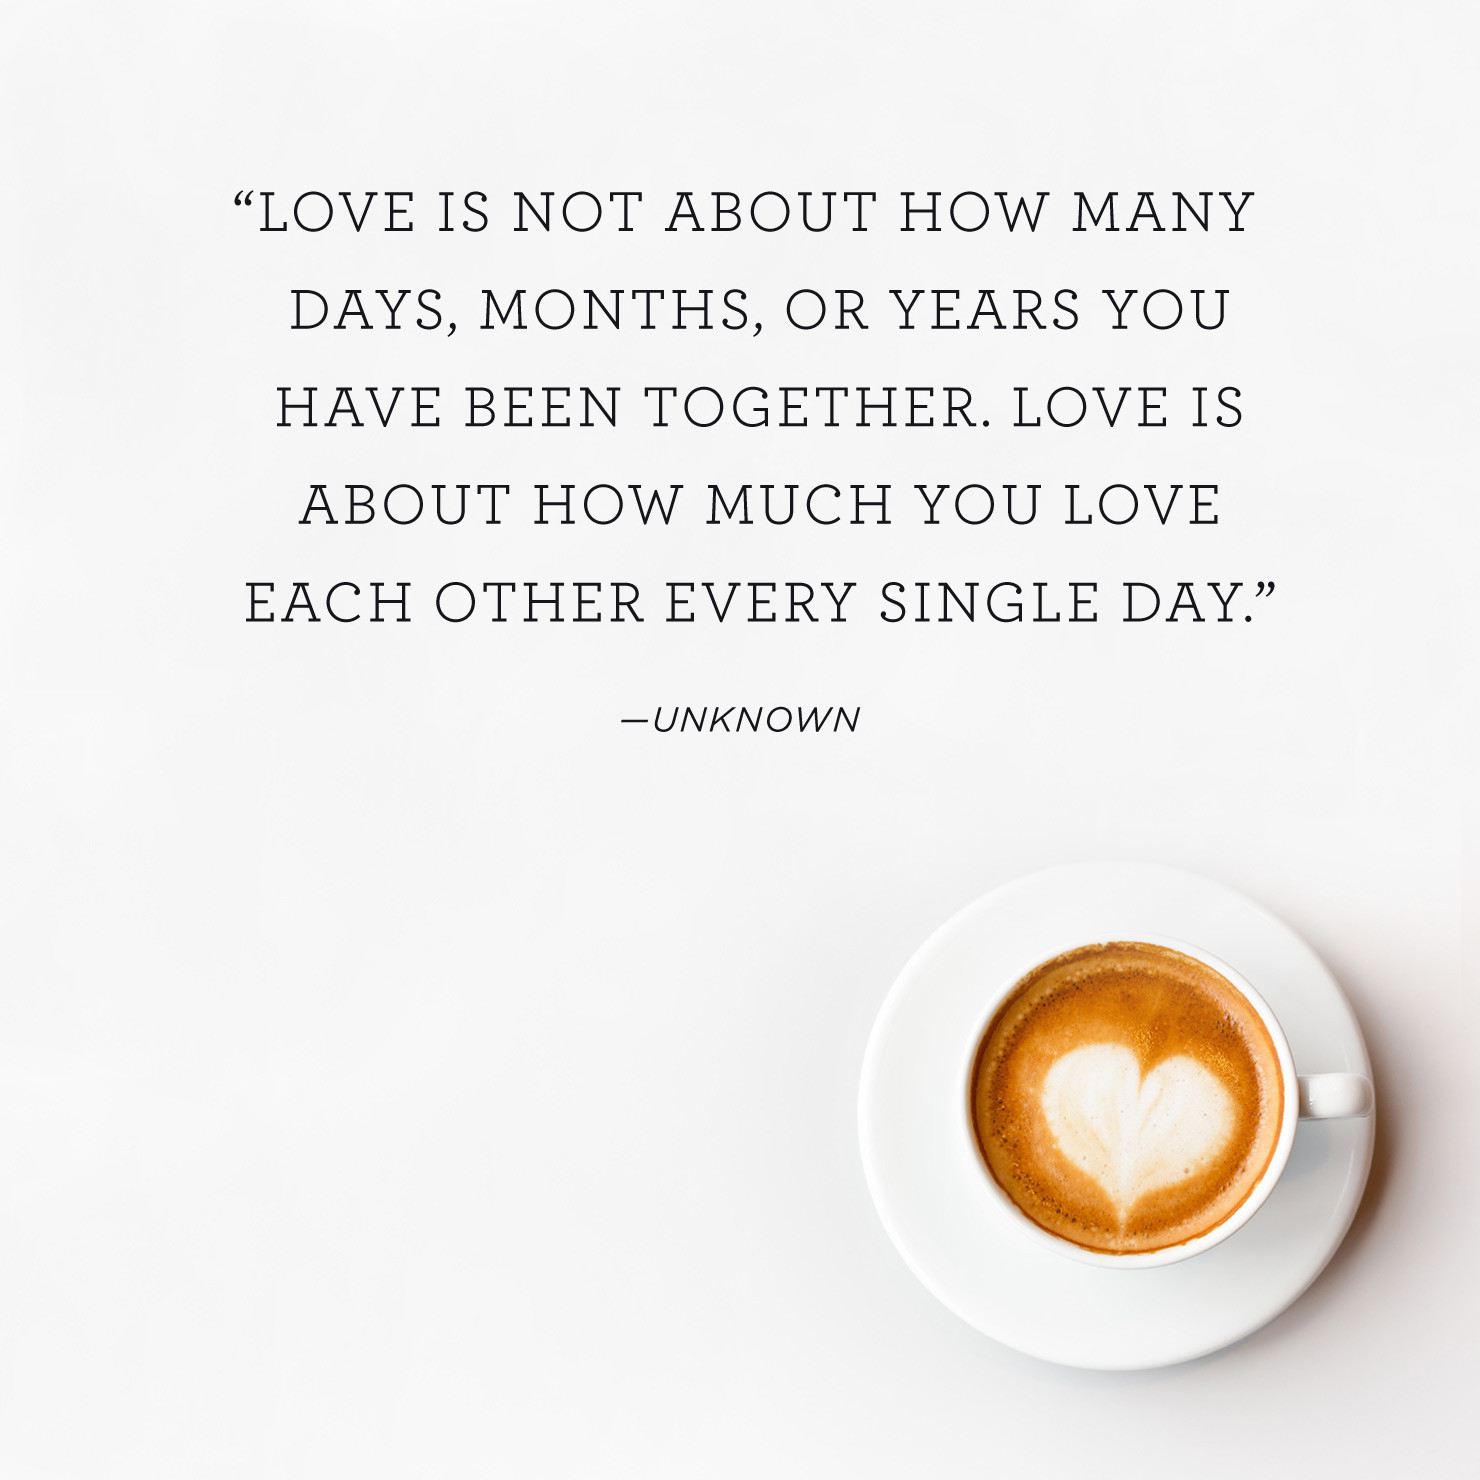 Quotes For Anniversary
 60 Happy Anniversary Quotes to Celebrate Your Love